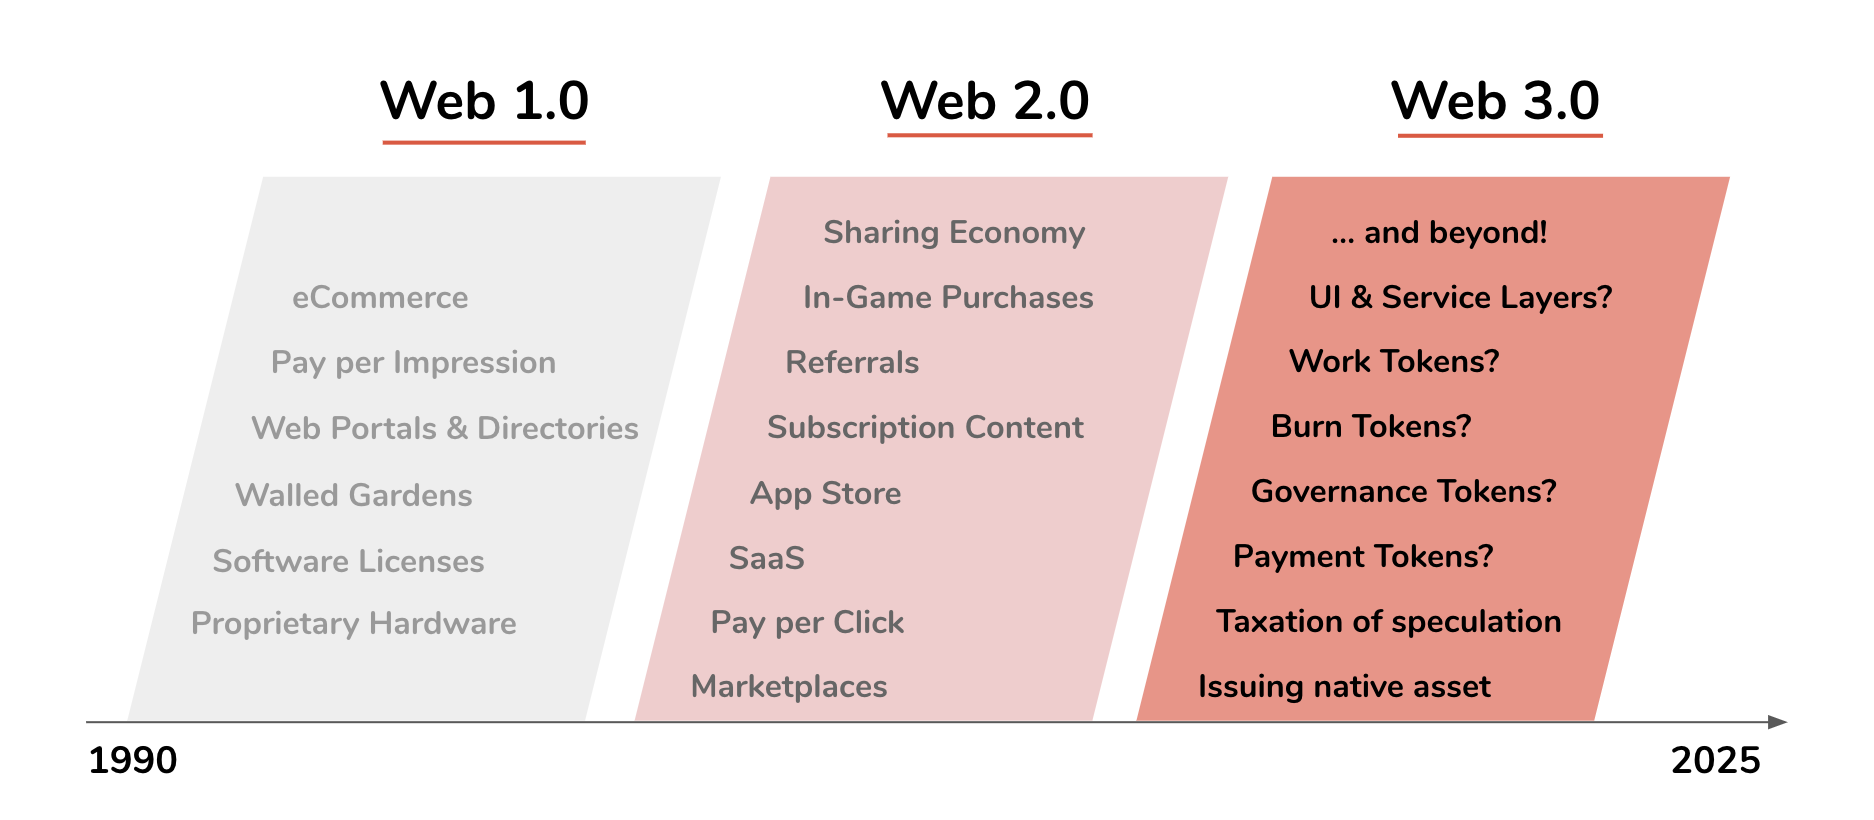 What is Web 1.0 vs Web 2.0 examples?